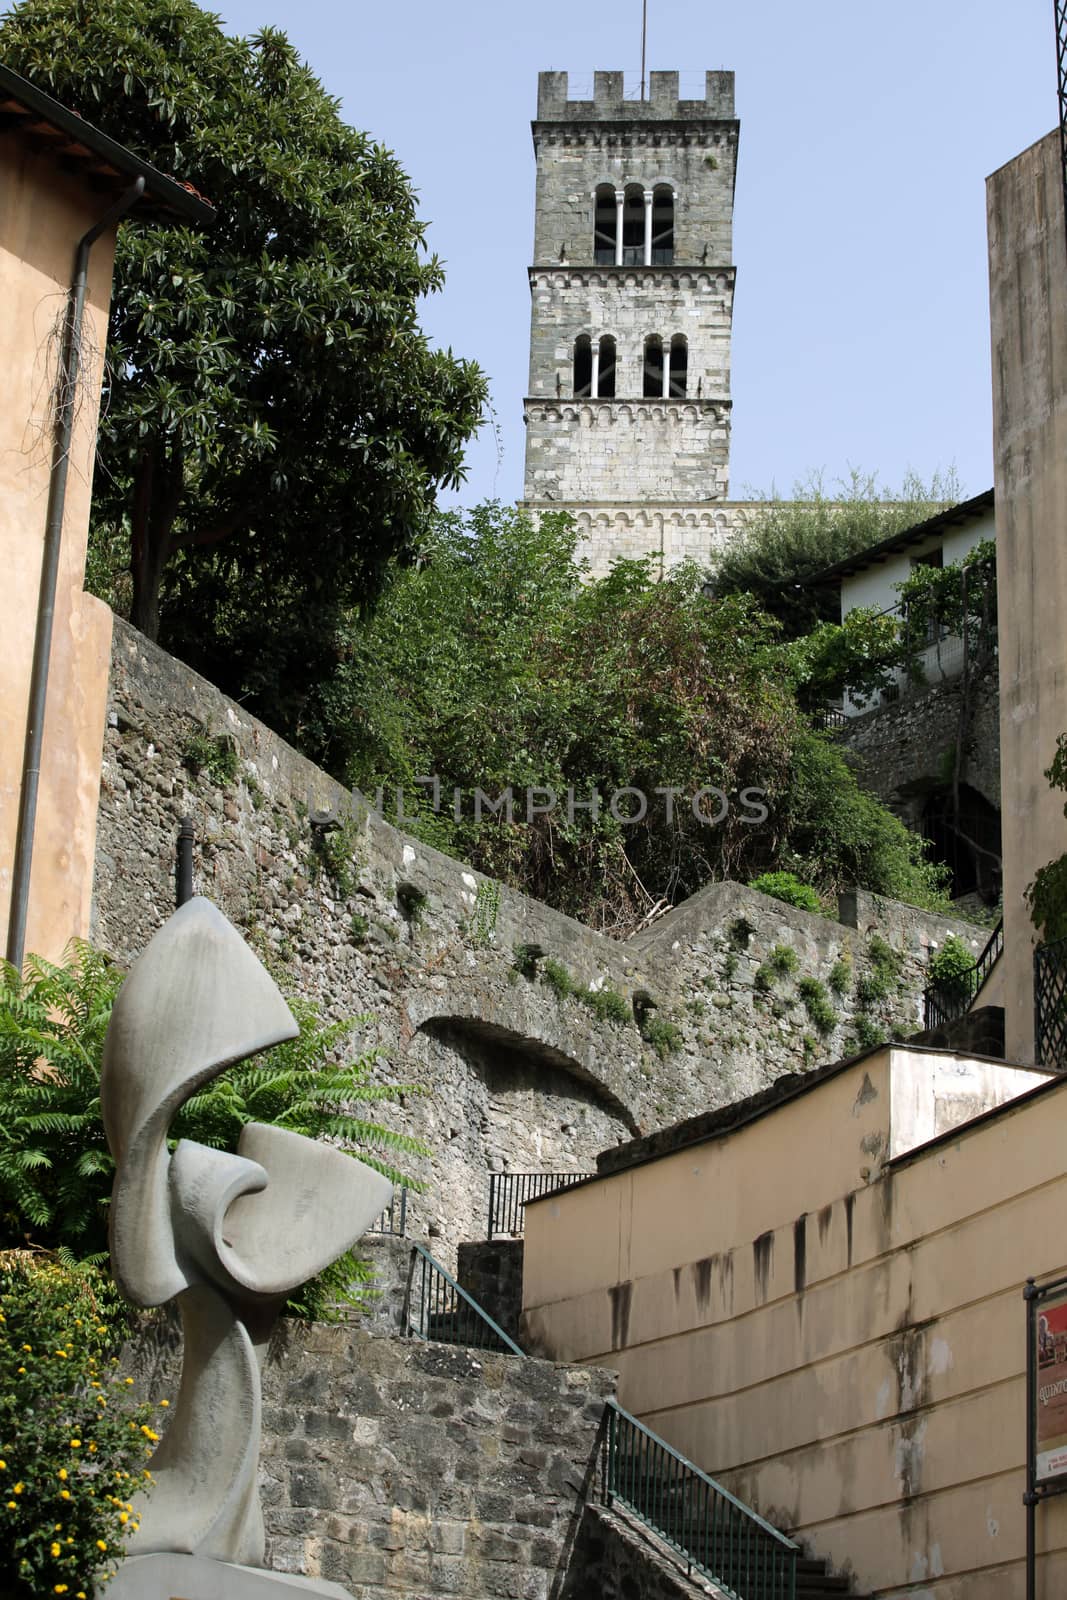 Barga a medieval hilltop town in Tuscany.Italy